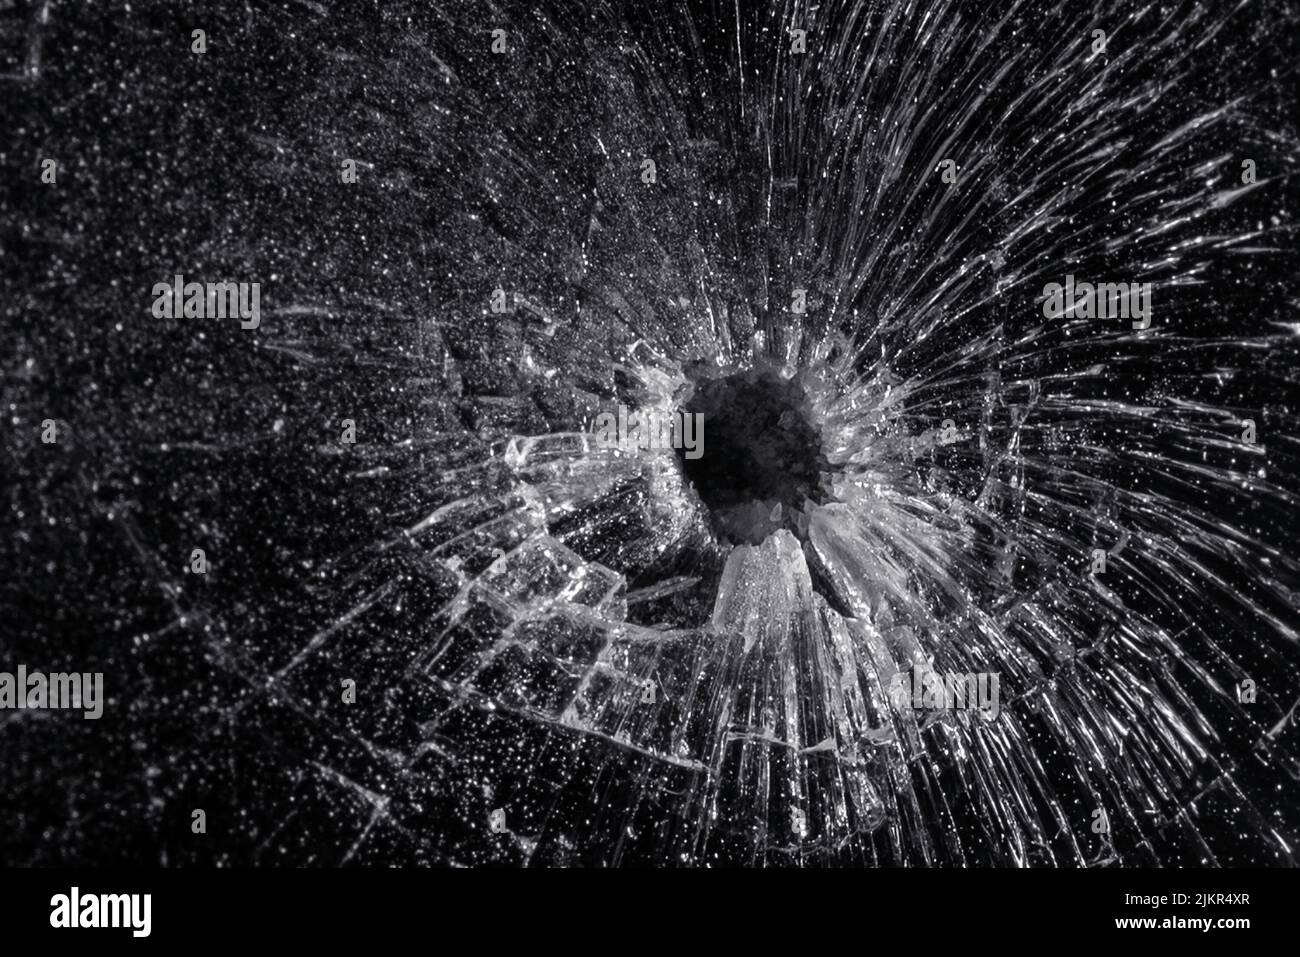 Bullet hole in a glass on the black background.closeup. Stock Photo